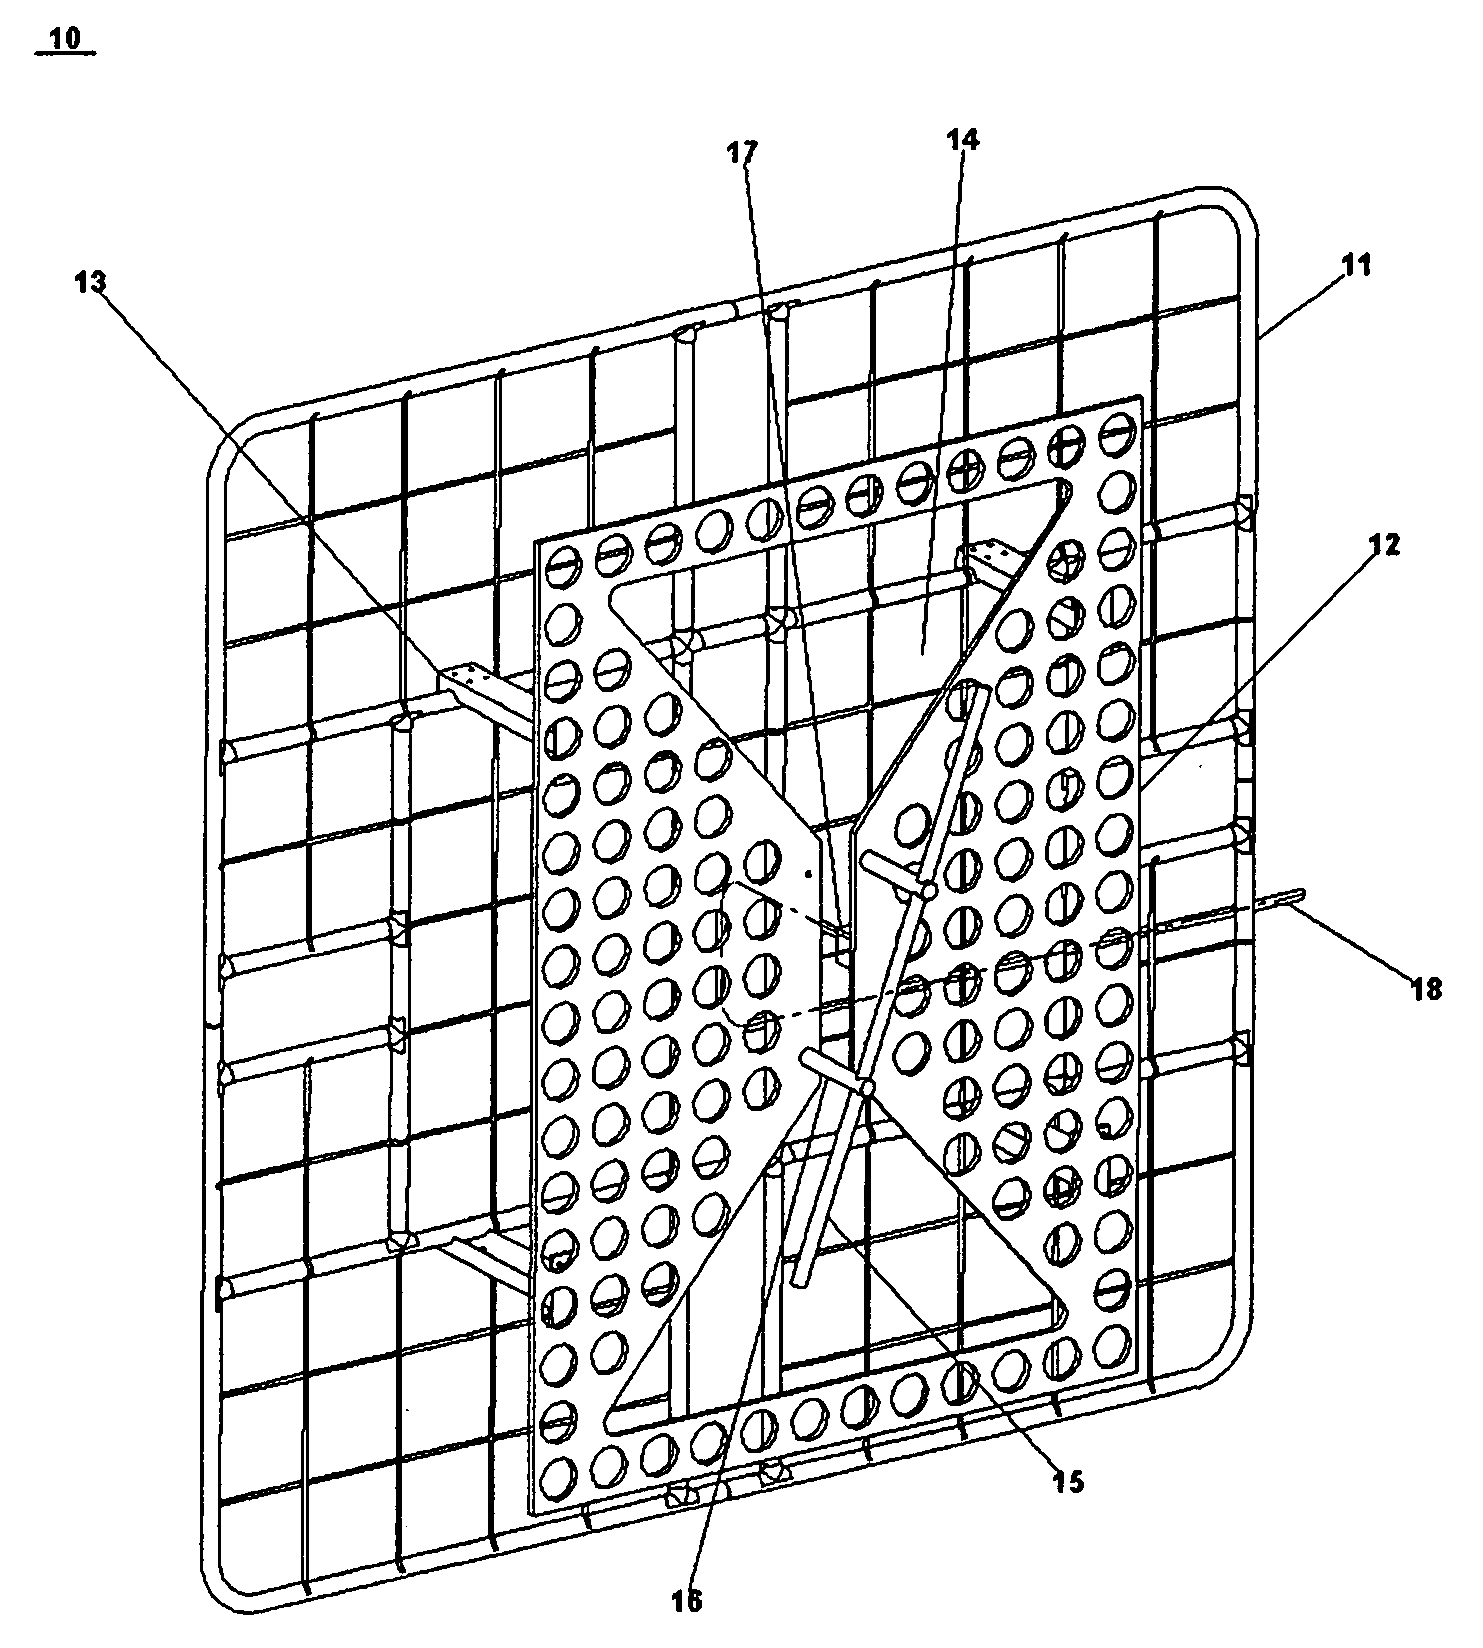 Circularly polarized broadcast panel system and method using a parasitic dipole